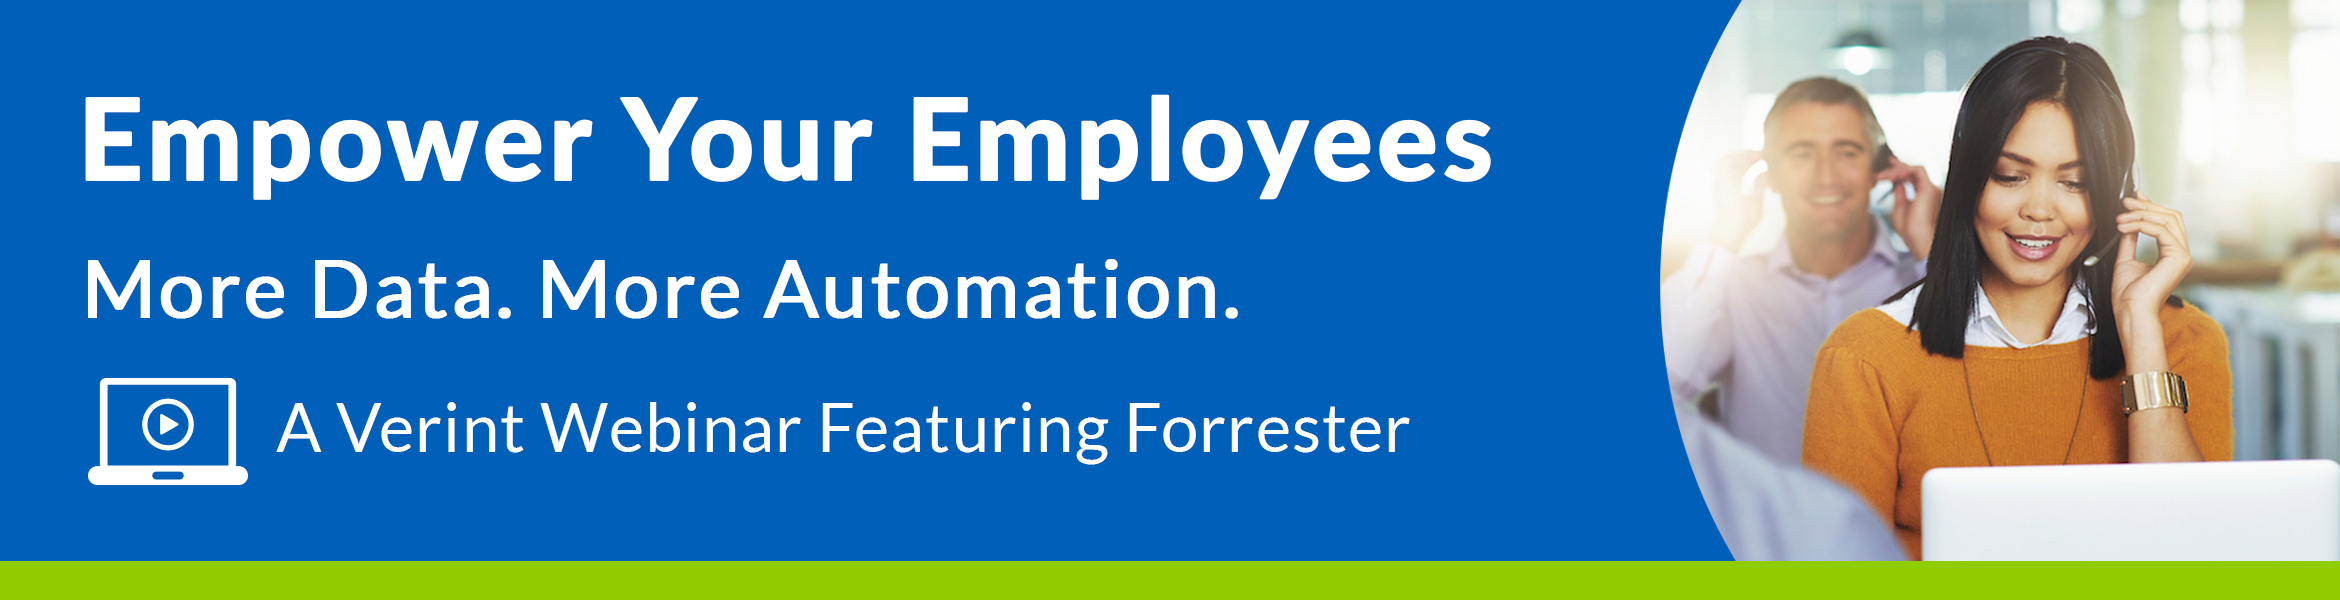 Verint | Empower Your Employees